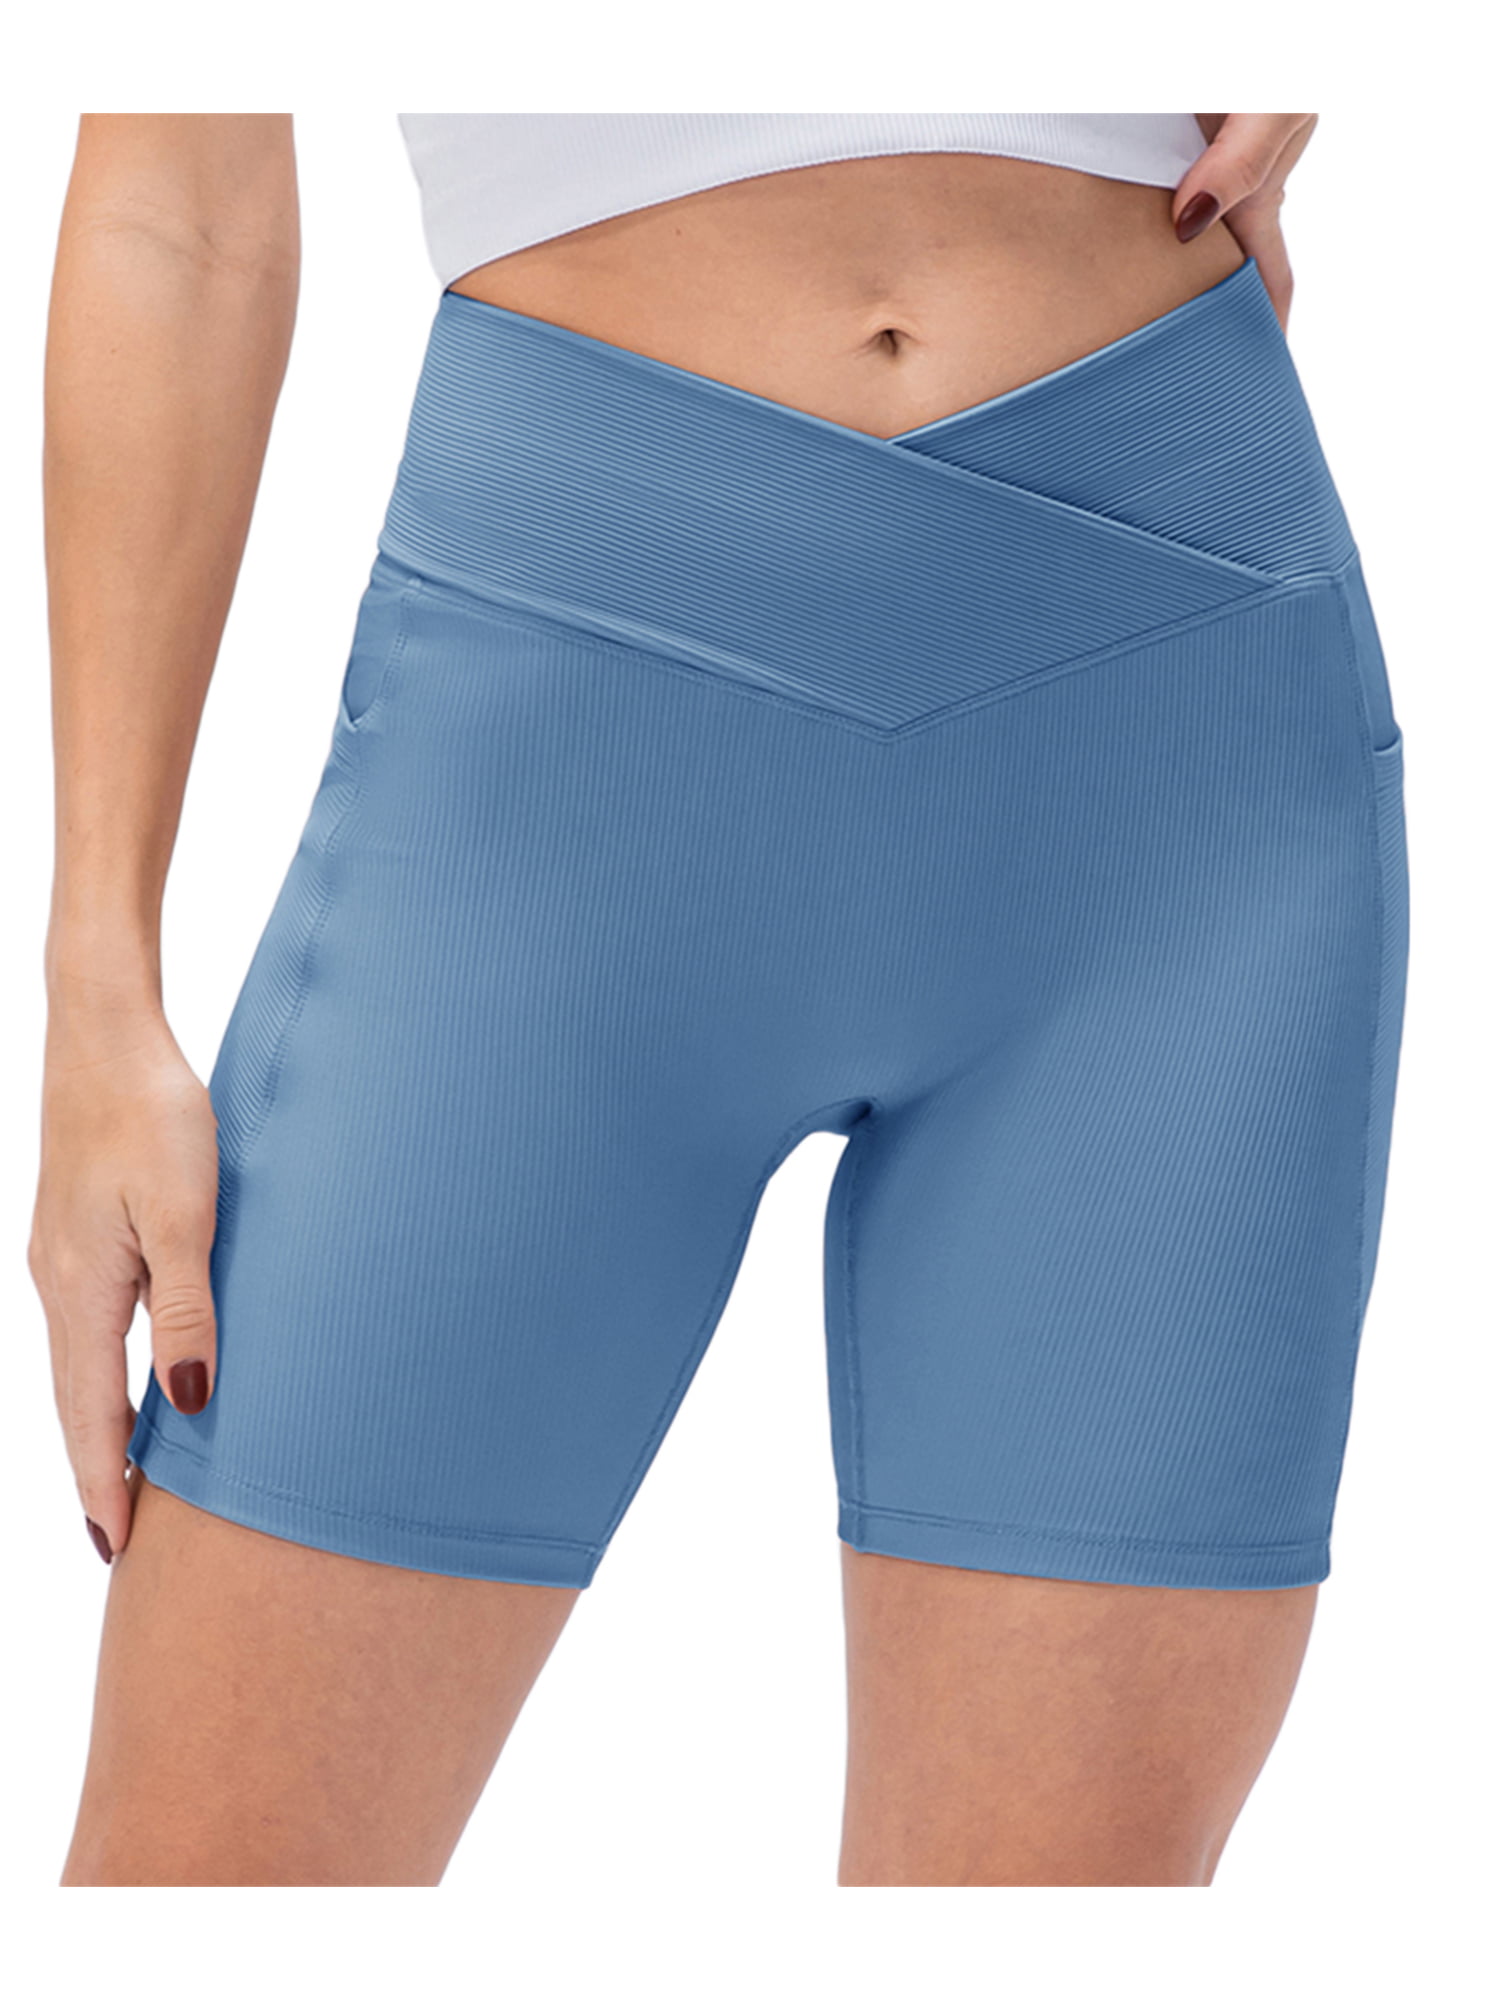 Geetobby Womens Yoga Fitness Sports Shorts Running Activewear Workout Running 